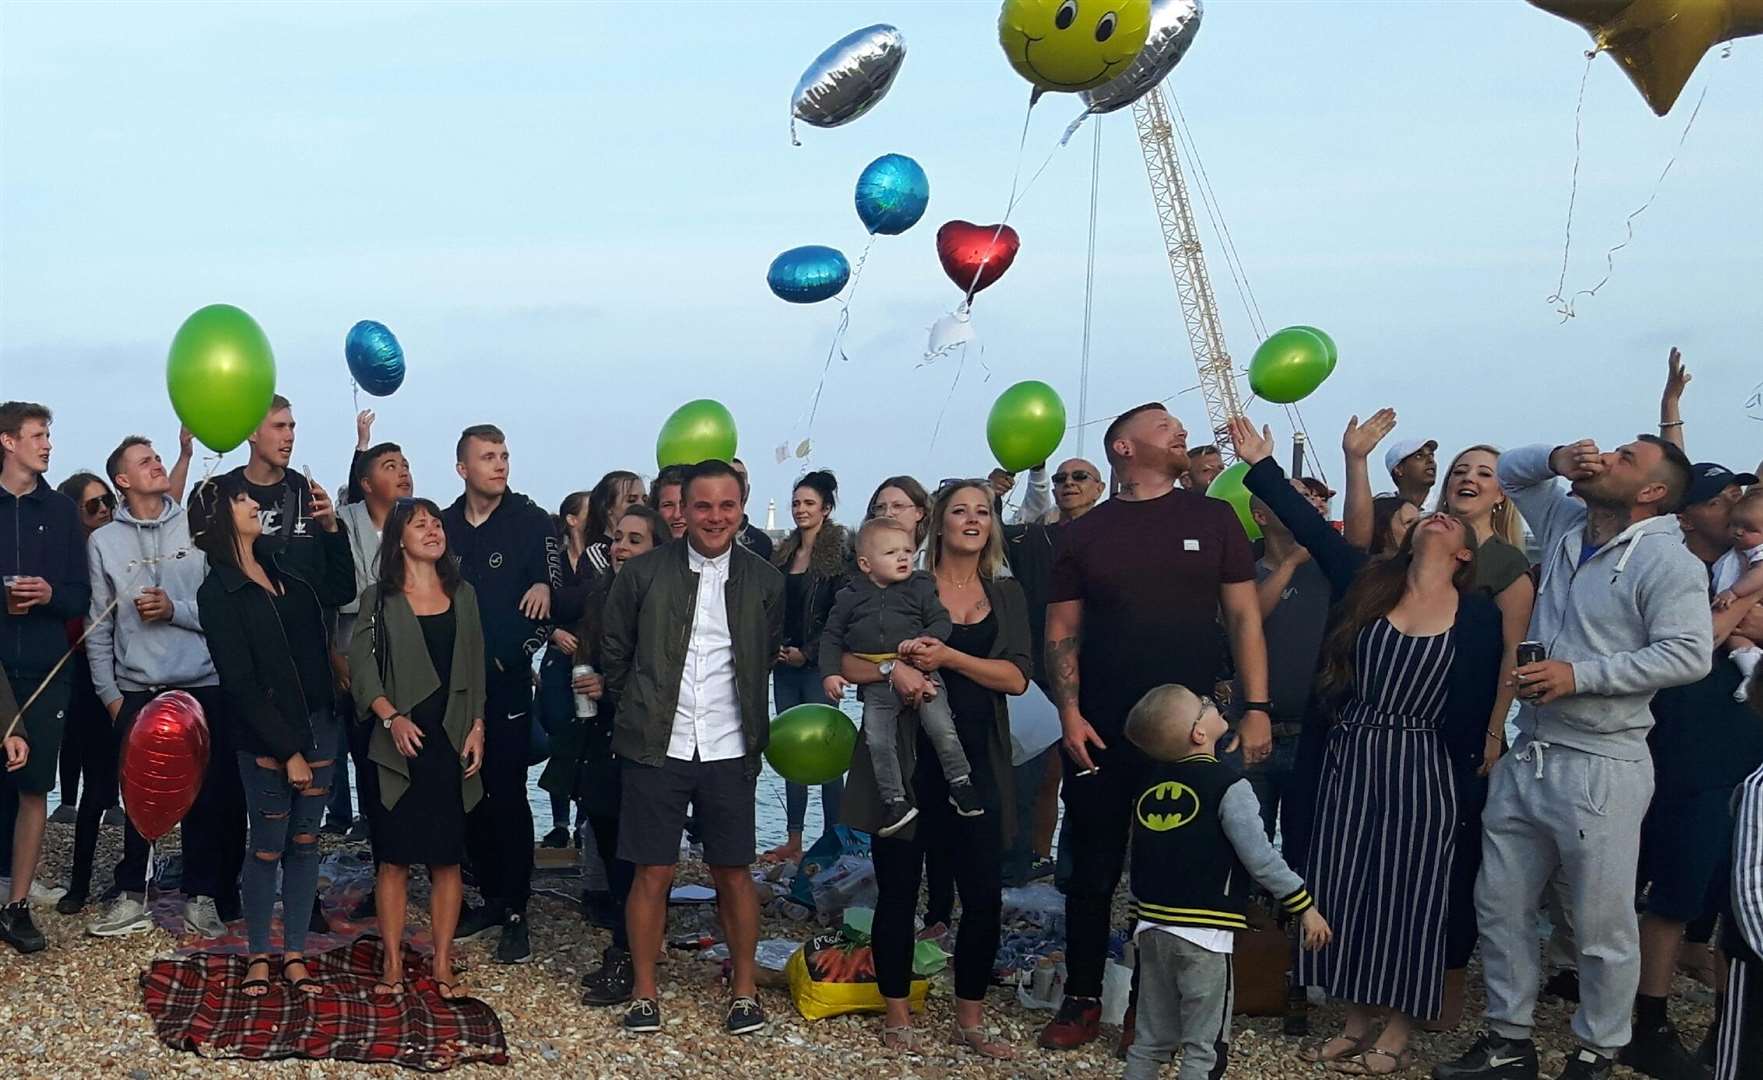 Celebrating his life. The balloons are released in Steven's honour.